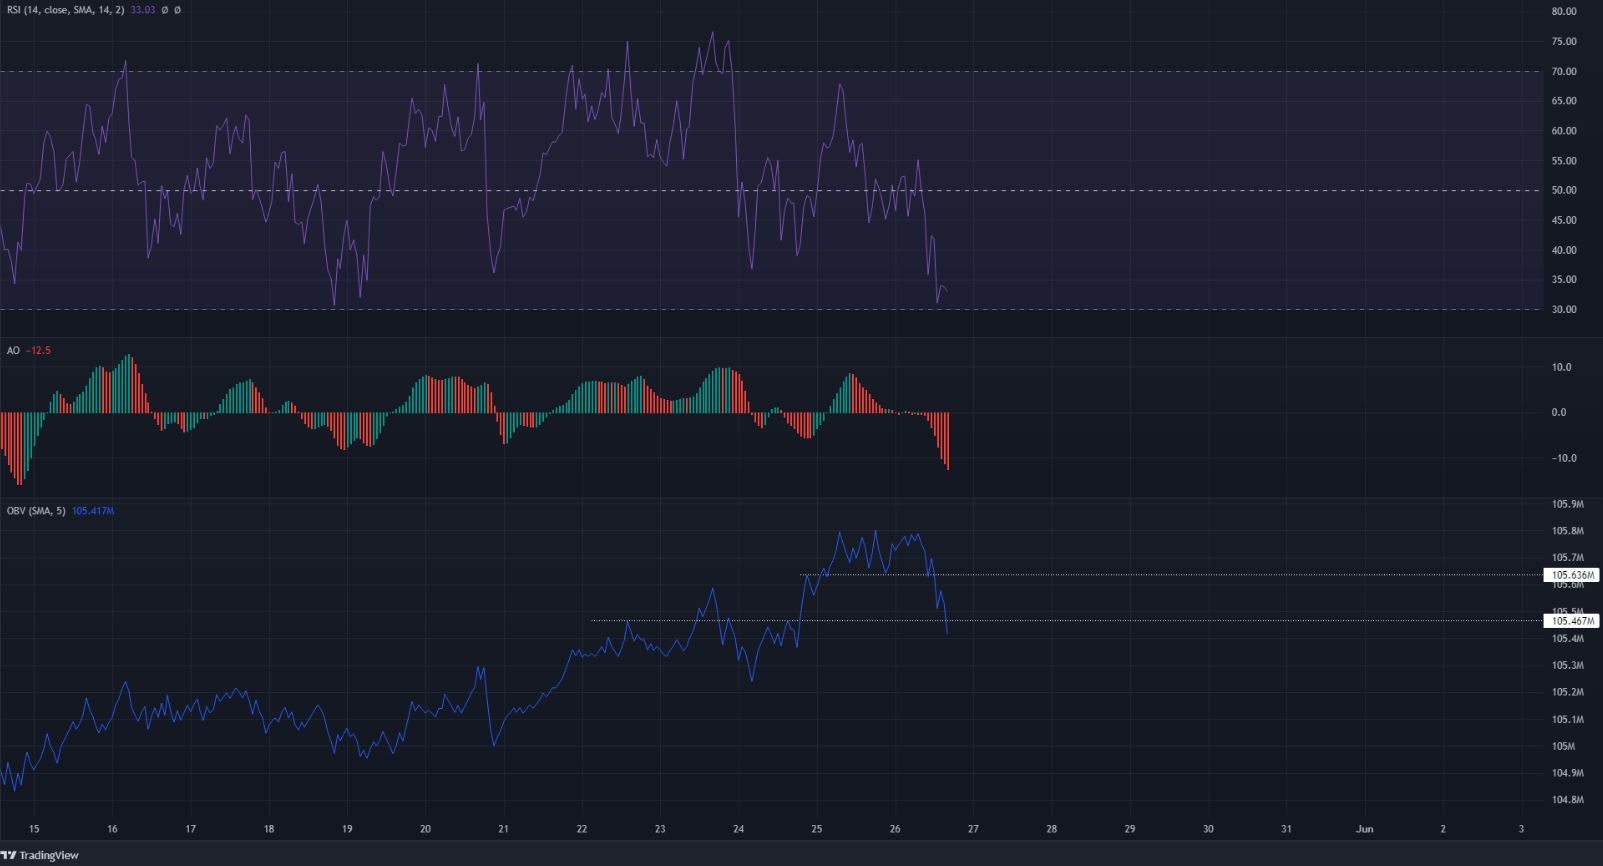 Shorting opportunity on Binance Coin after a drop beneath support